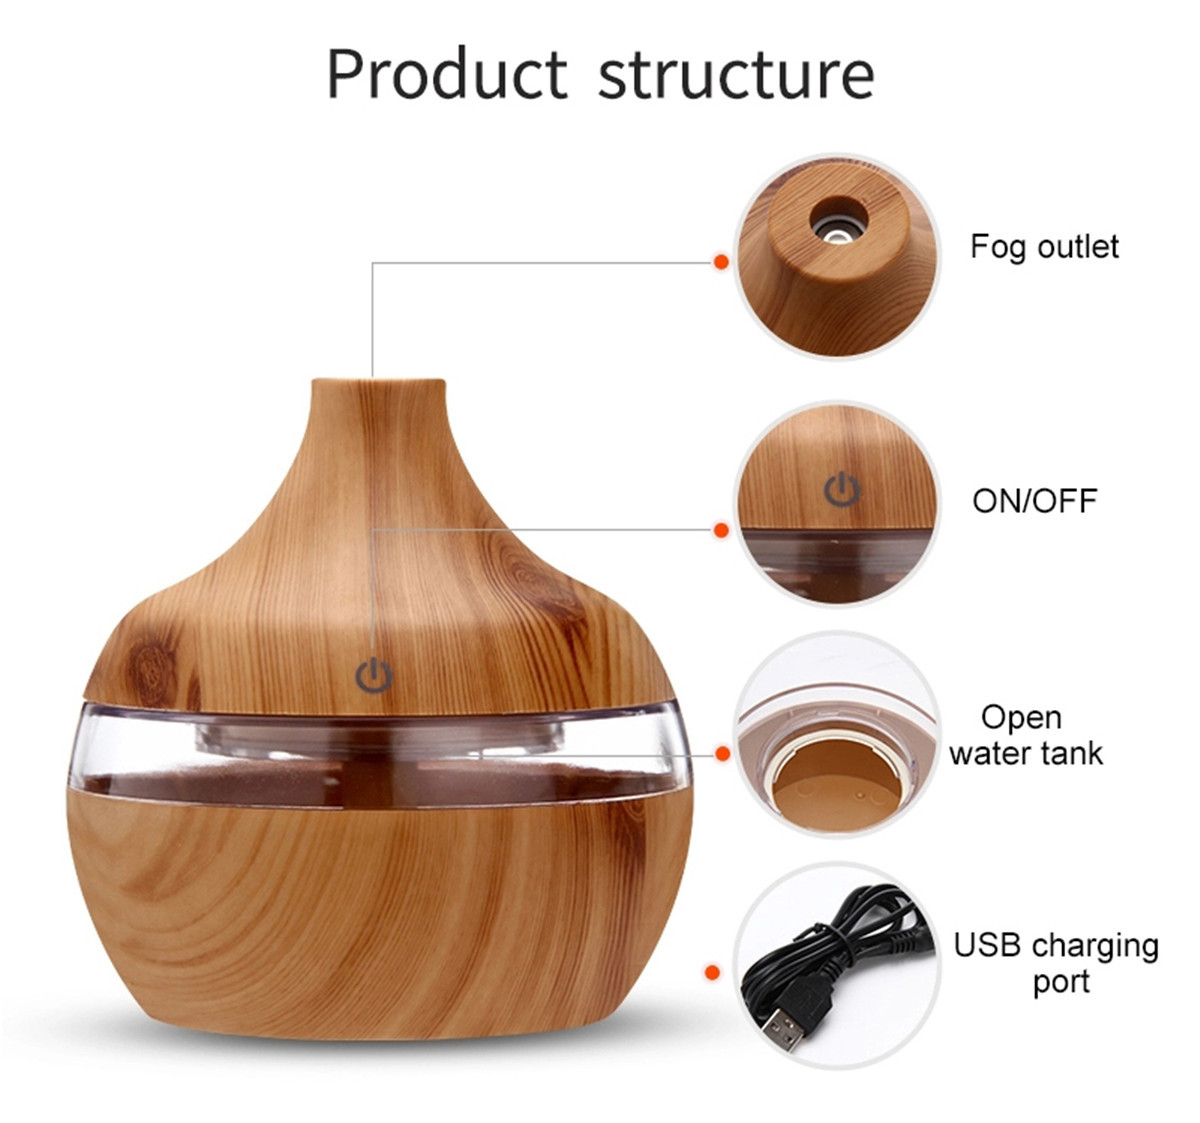 300ml-Electric-Ultrasonic-Air-Mist-Humidifier-Purifier-Aroma-Diffuser-7-Colors-LED-USB-Charging-for--1761154-8